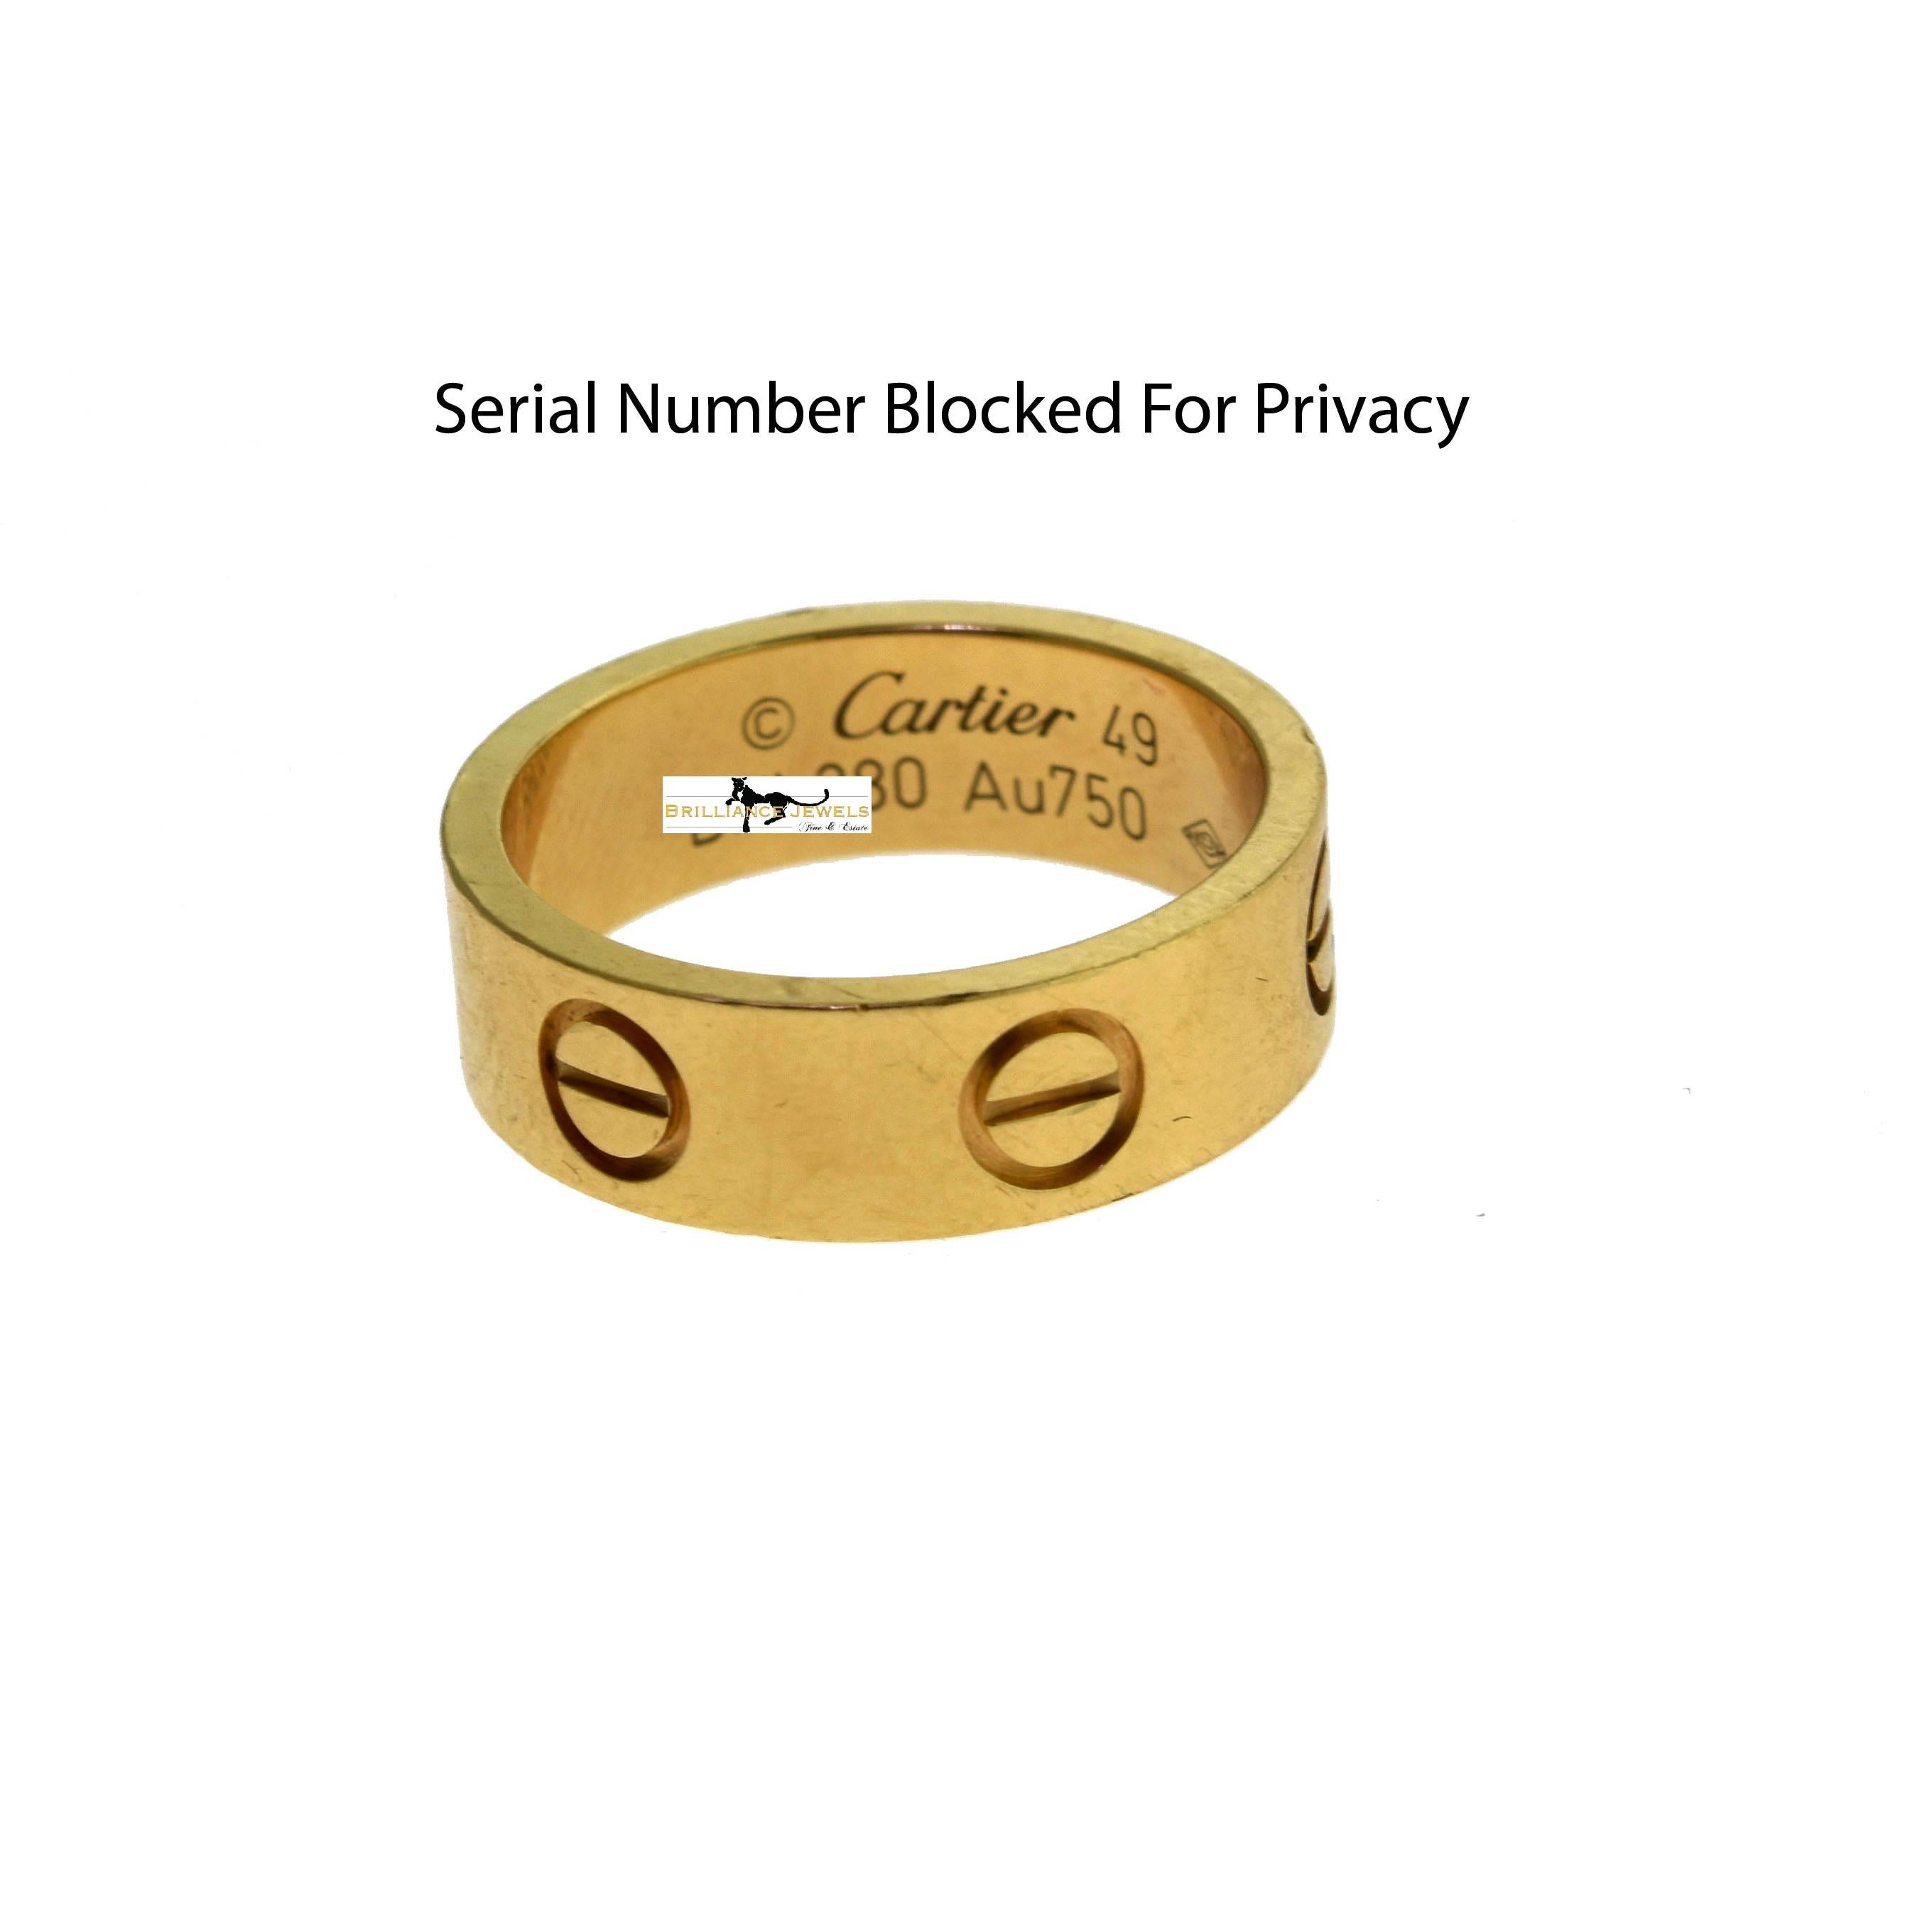 Brilliance Jewels, Miami
Questions? Call Us Anytime!
786,482,8100

Ring Size: 49 (euro) ; 4.75 (US)

Designer: Cartier

Collection: LOVE

Style: Band Ring

Metal: Yellow Gold

Metal Purity: 18k

Band Width: 5.59 mm

Total Item Weight (grams):